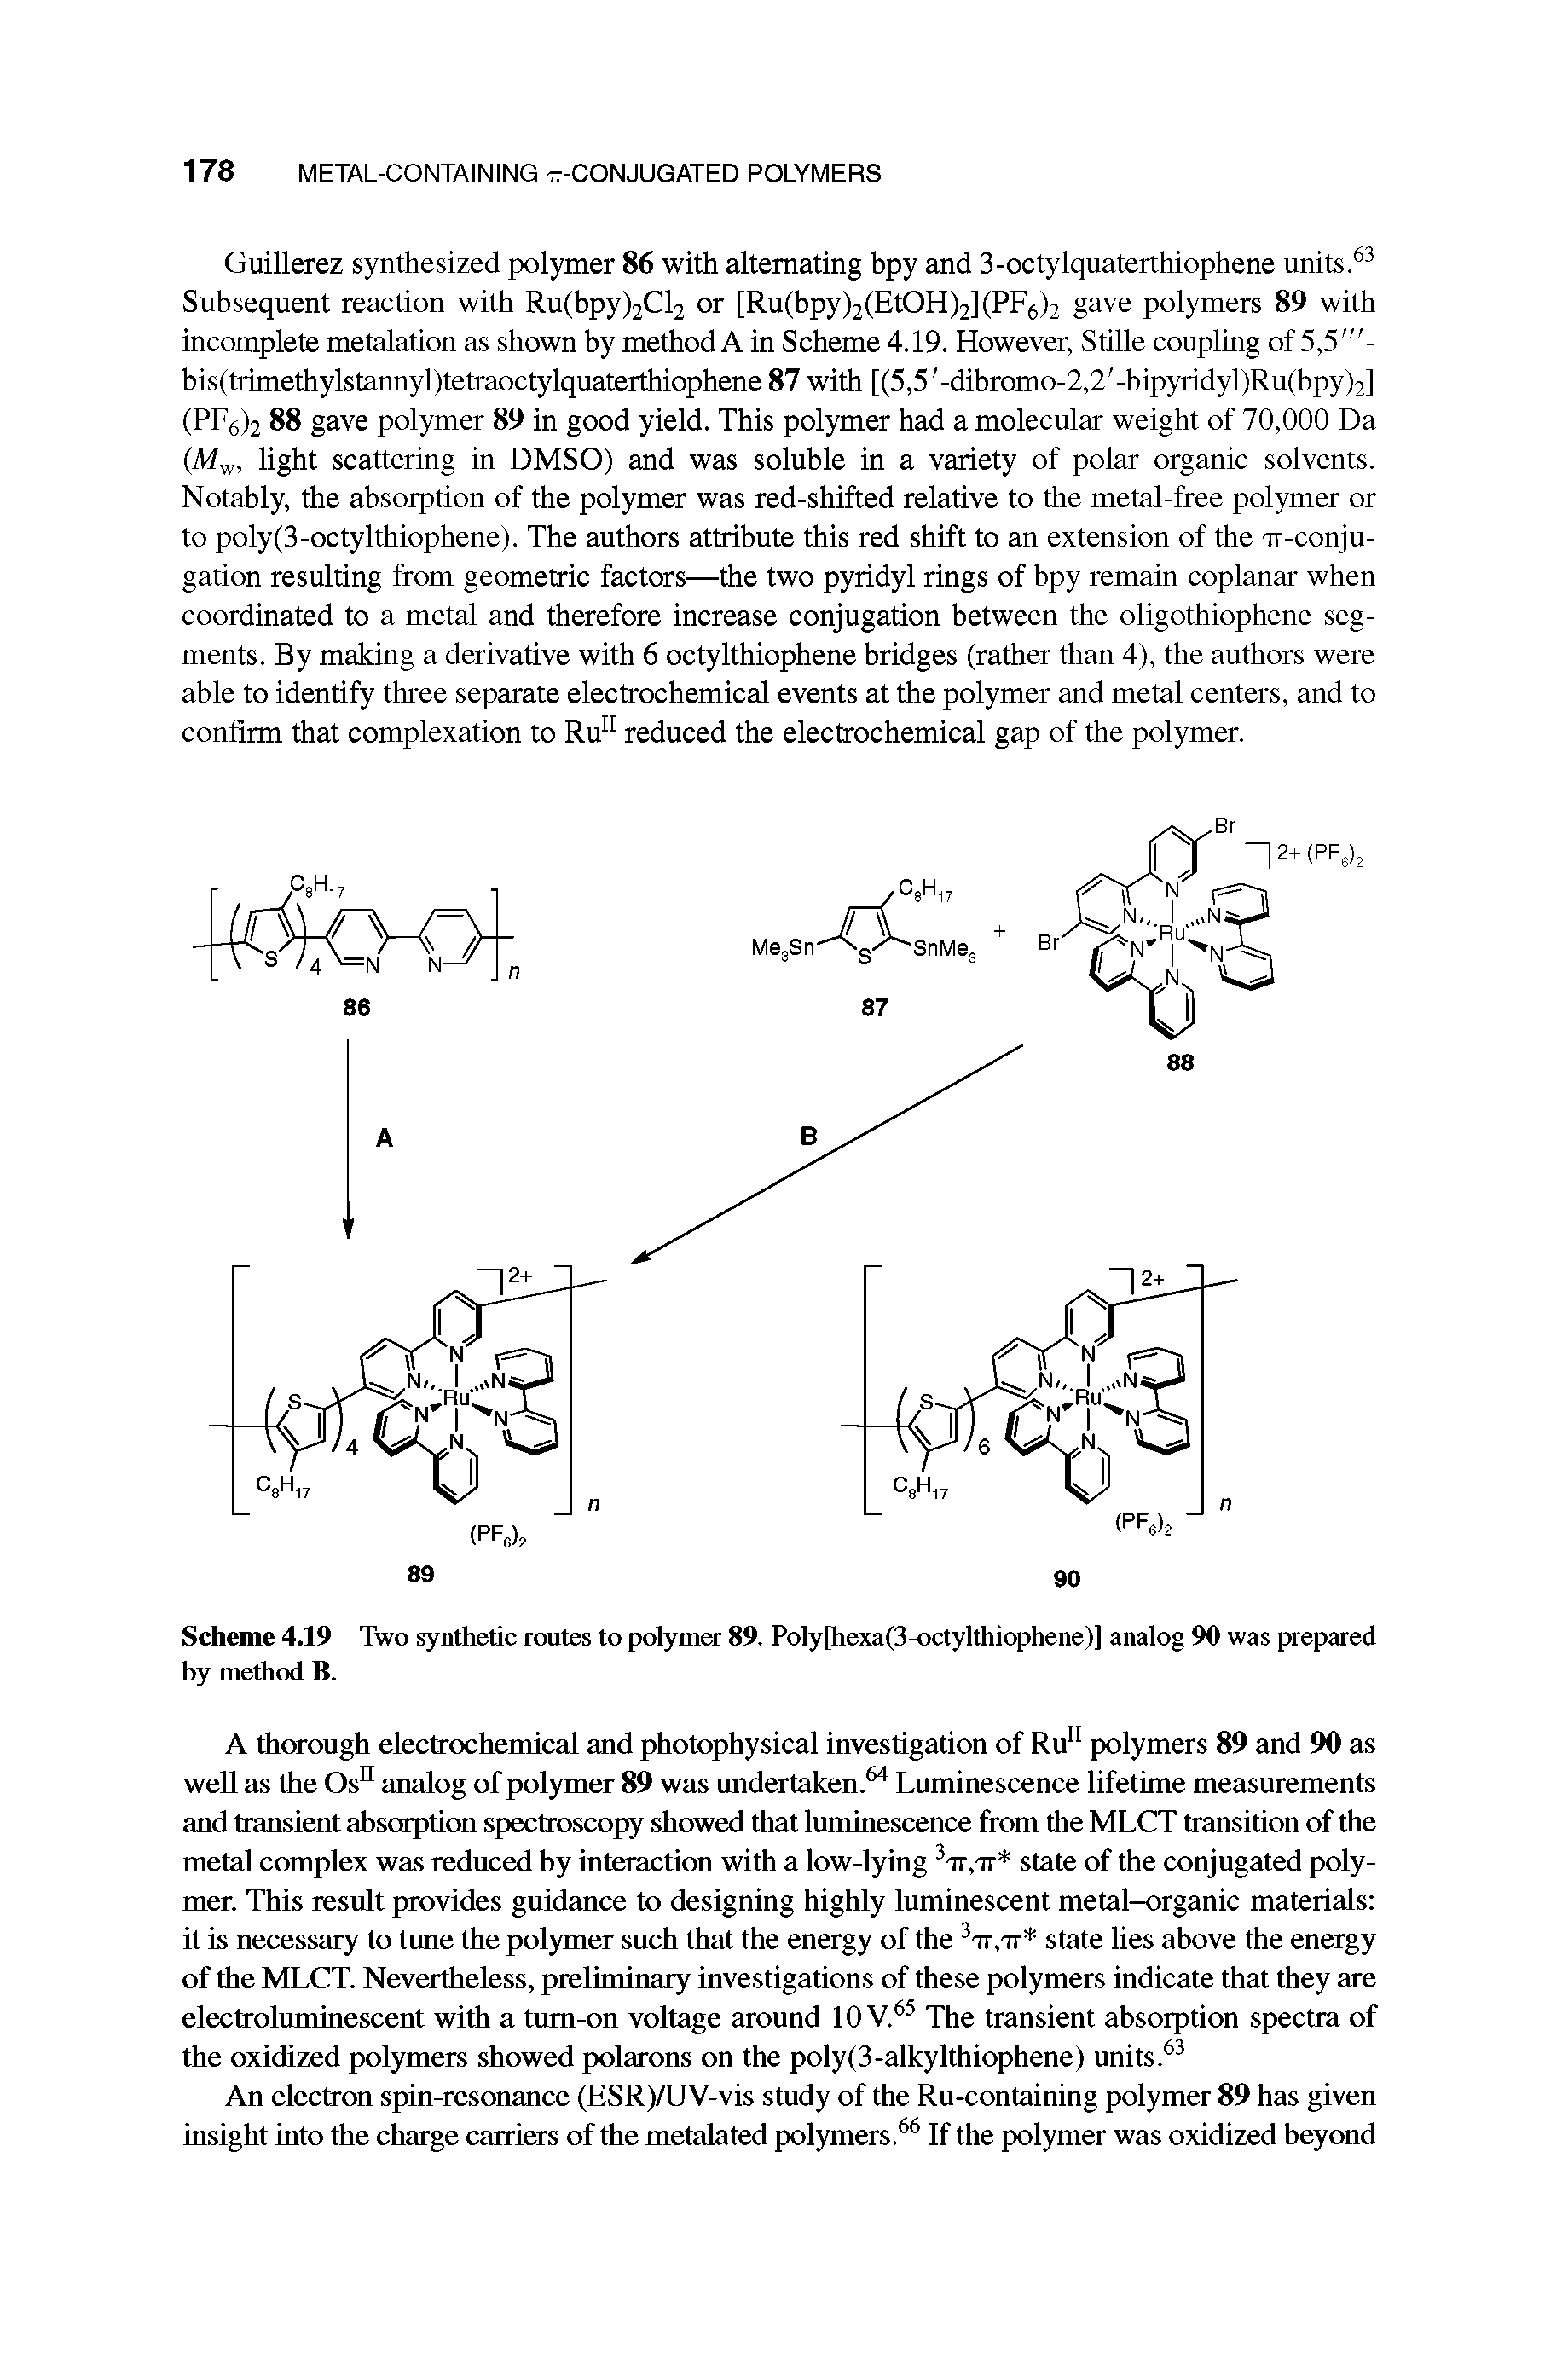 Scheme 4.19 Two synthetic routes to polymer 89. Poly[hexa(3-octylthiophene)] analog 90 was prepared by method B.